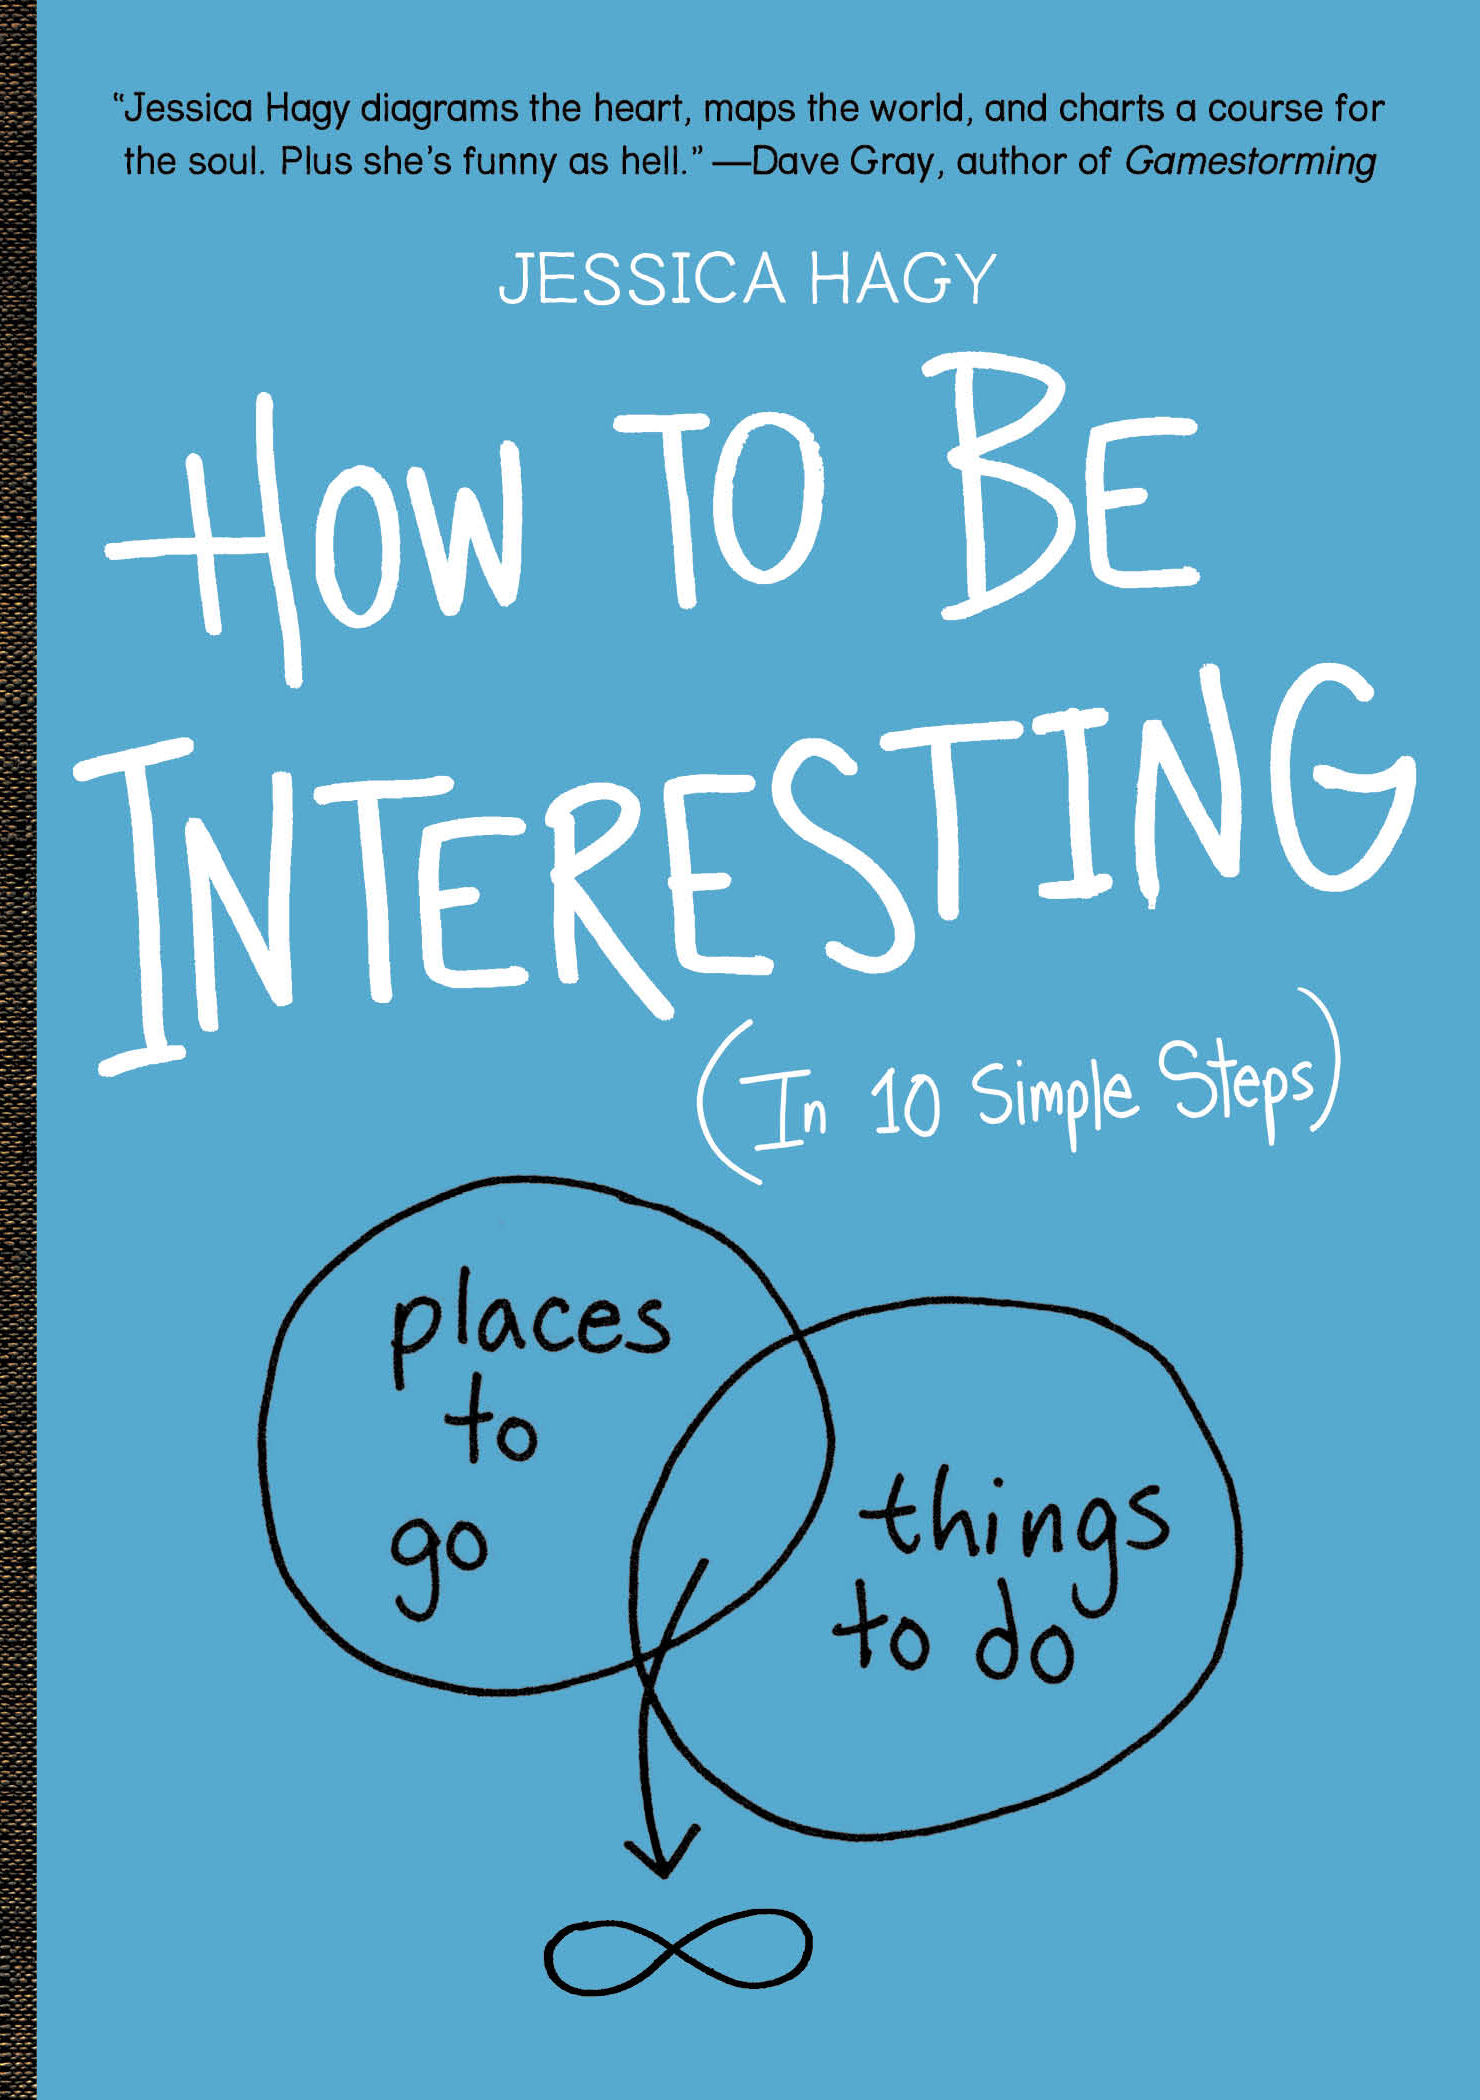 Book review: How to be Interesting by Jessica Hagy